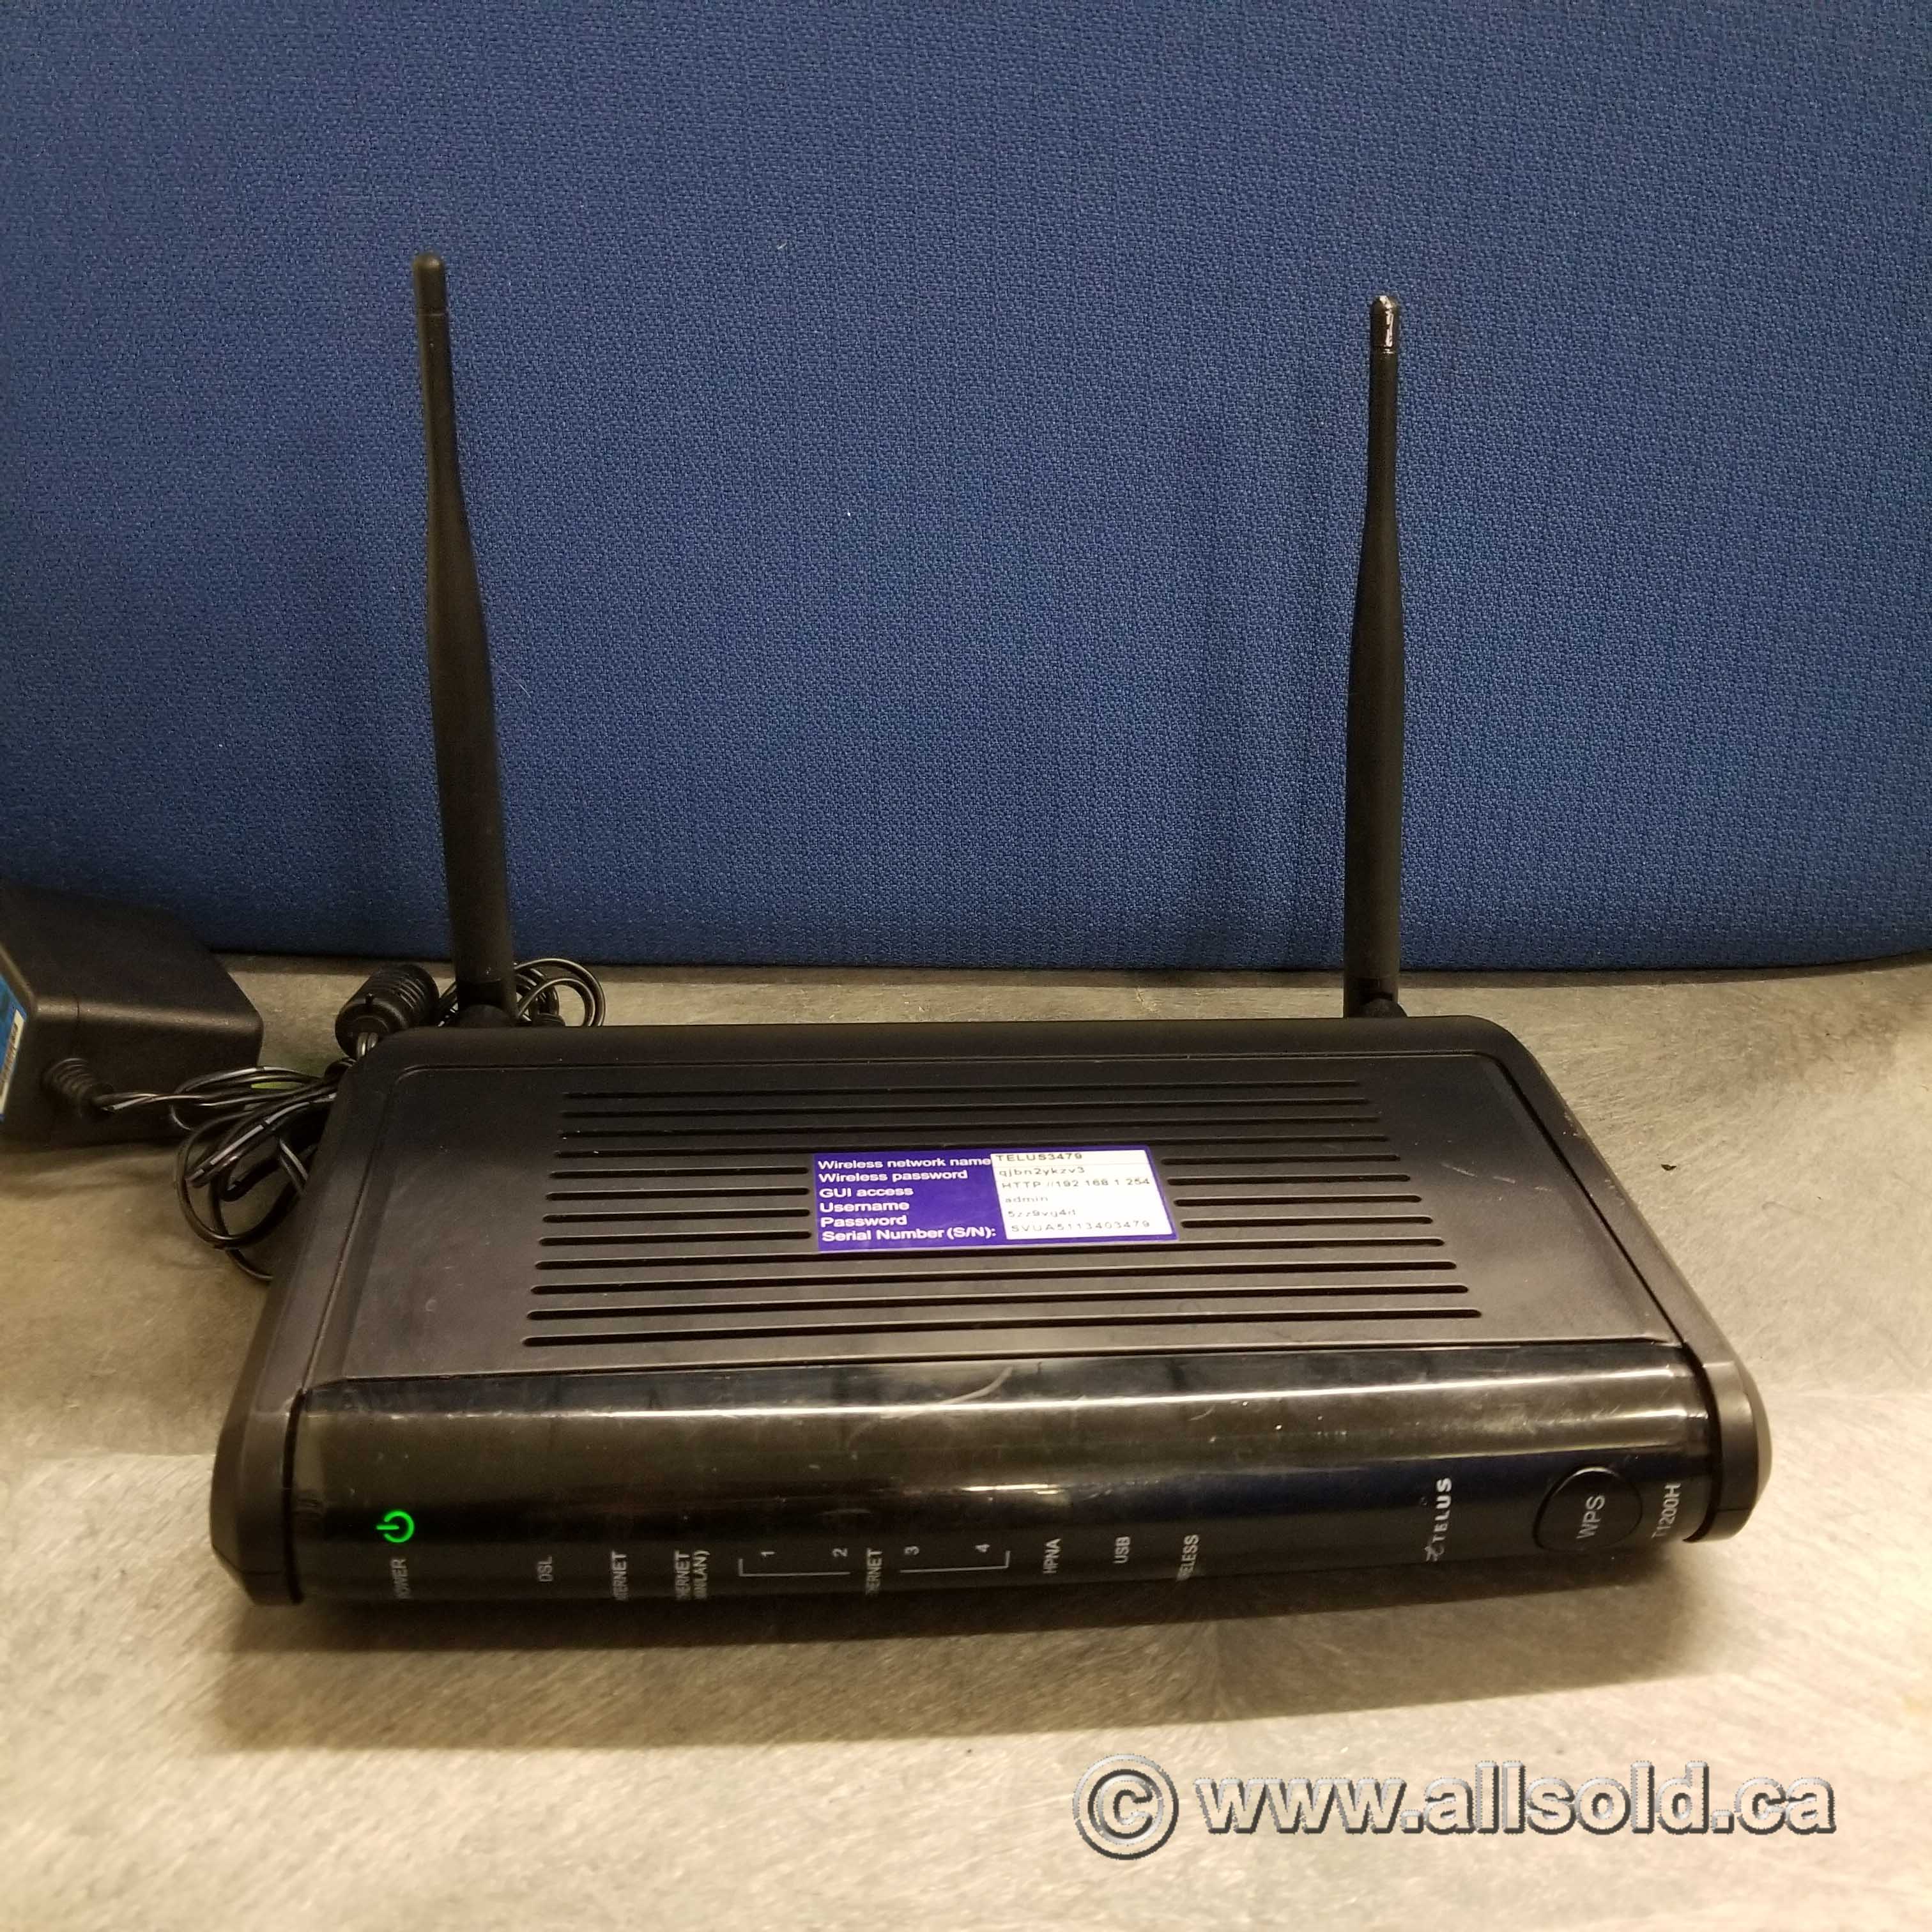 Actiontec Wireless 80211n Vdsl Modem Router T1200h Allsoldca Buy And Sell Used Office 5417